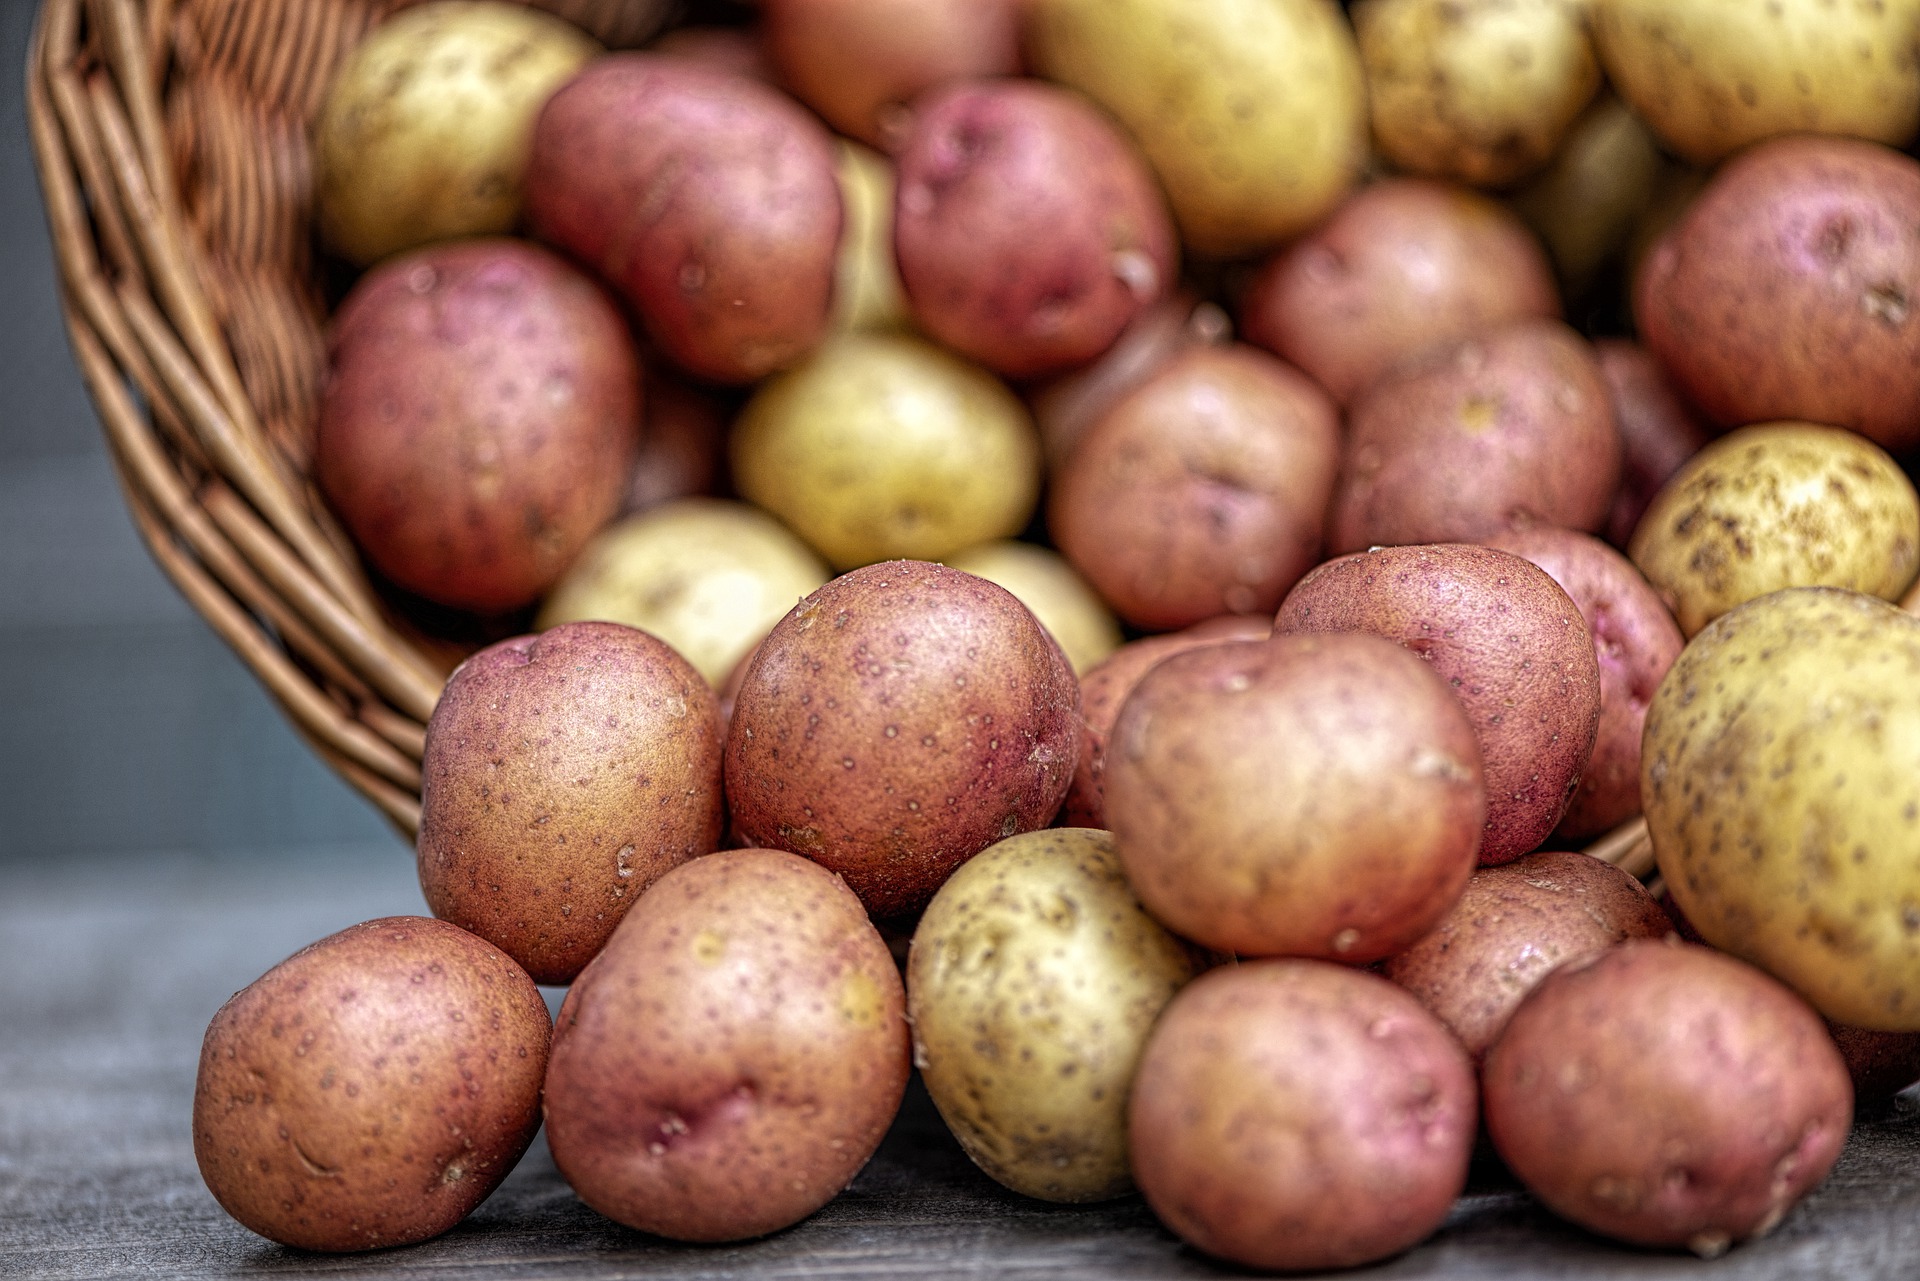 Potatoes provide several important nutrients, including potassium, complex carbohydrates, vitamin C and fiber. (Photo courtesy of Pixabay)